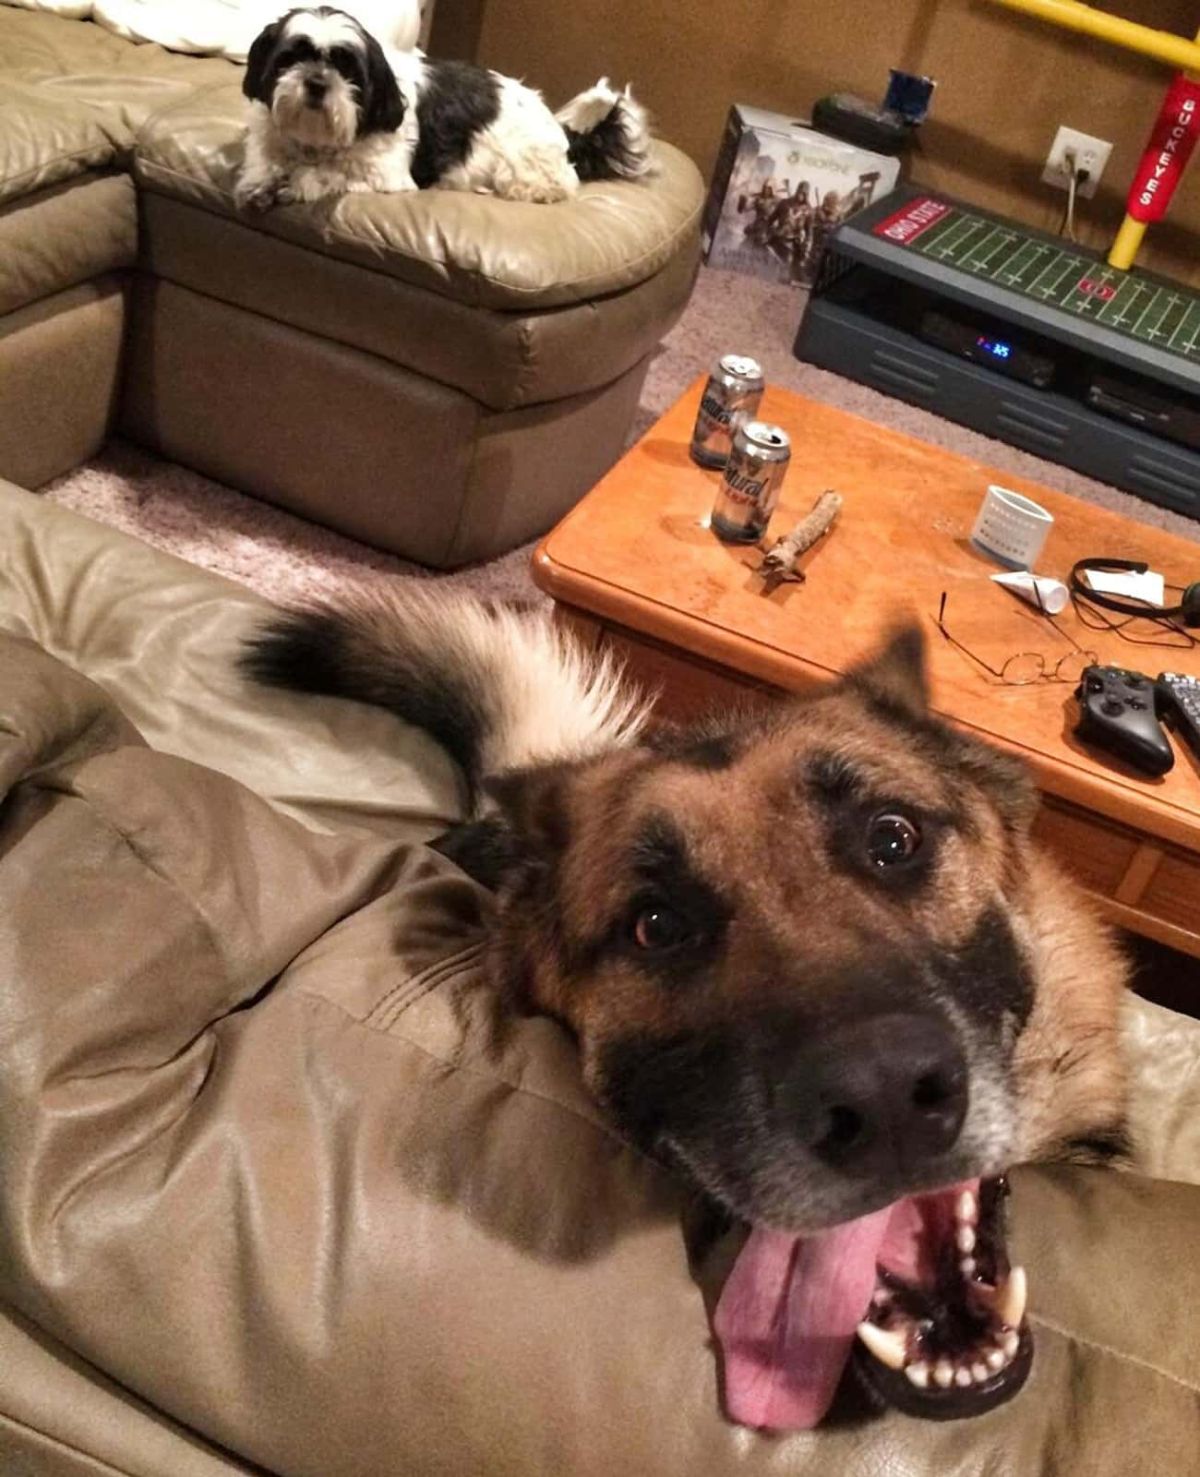 german shepherd on a brown sofa looking up with tongue sticking out while a black and whtie fluffy dog is behind it on a brown sofa